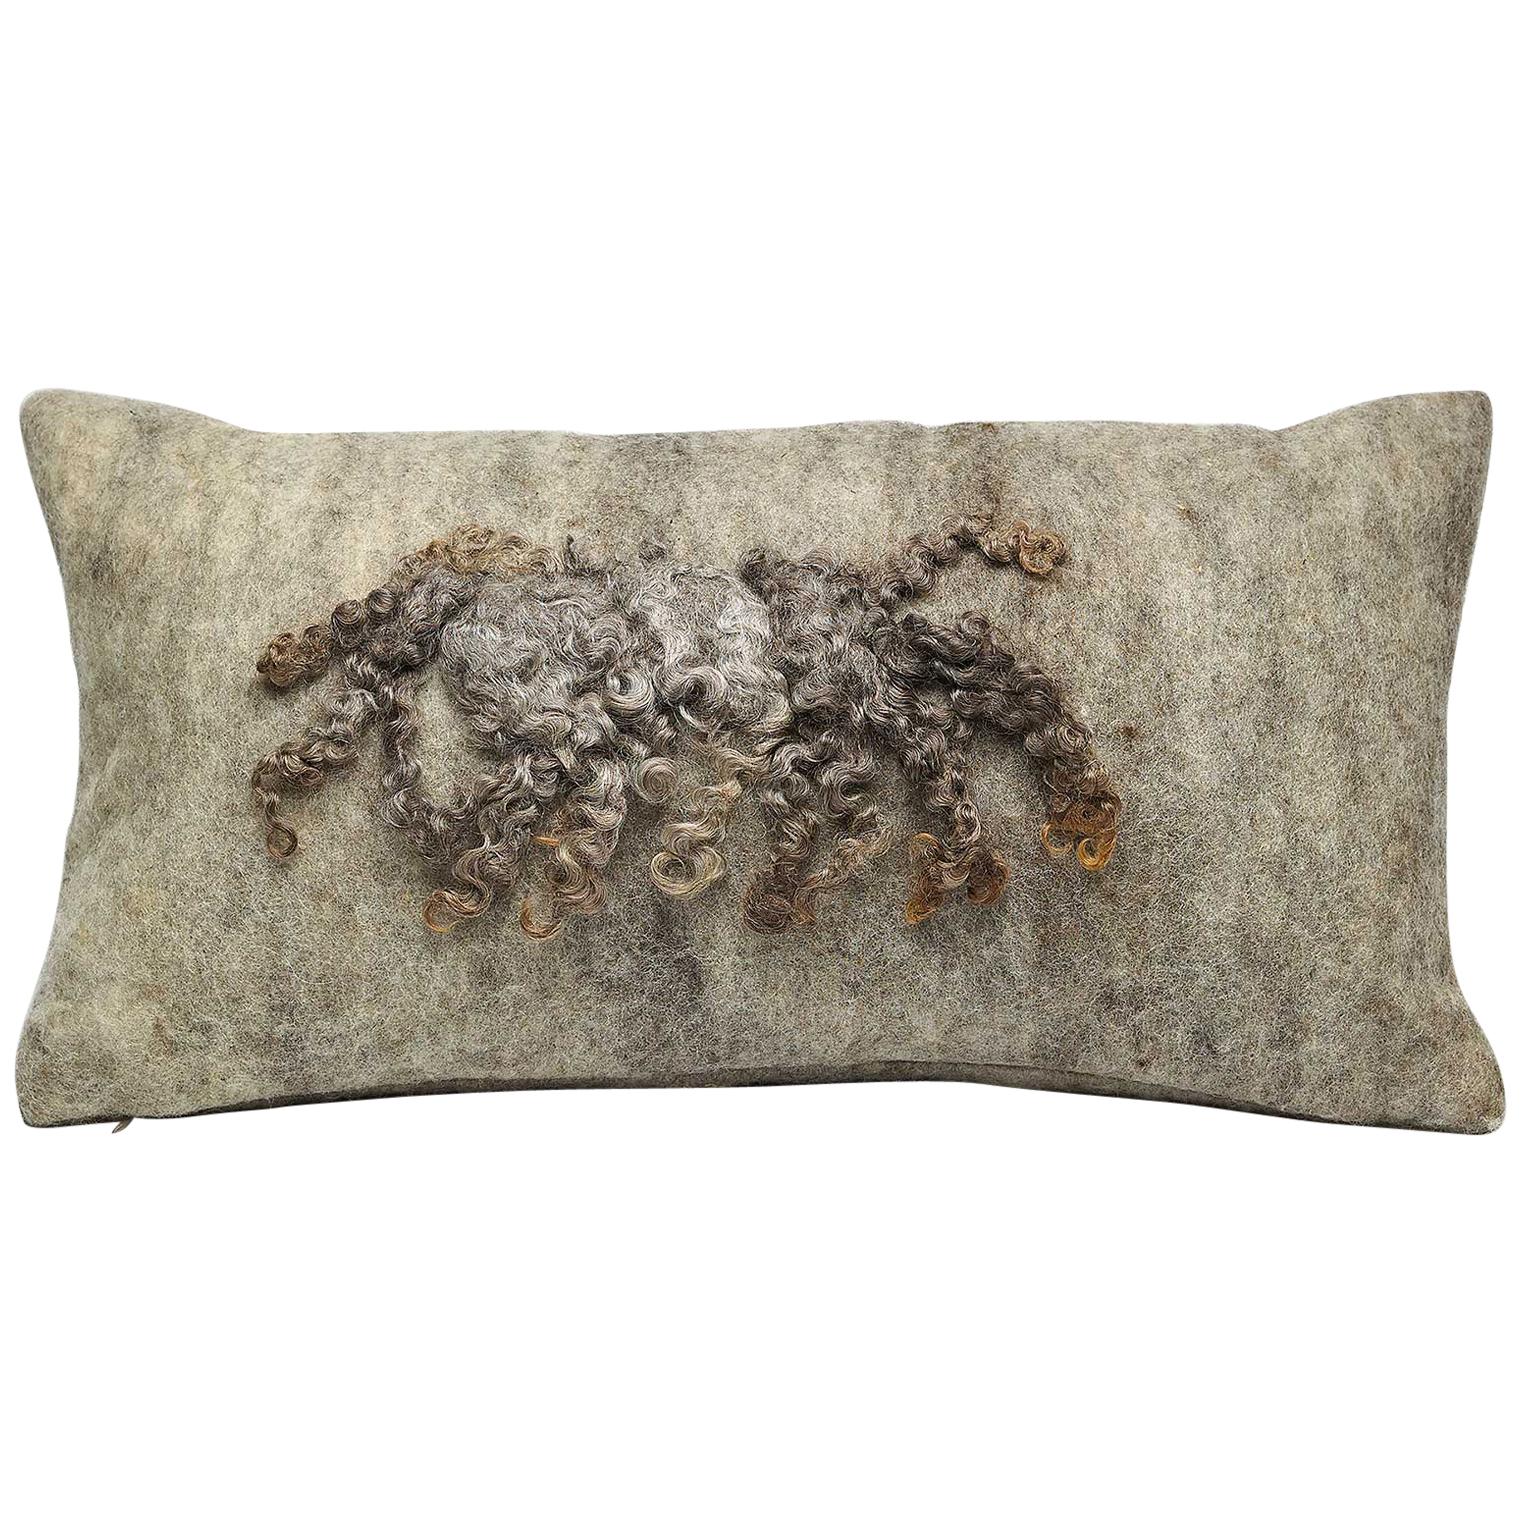 Wool Wensleydale Pillow Grey, Small - Heritage Sheep Collection For Sale